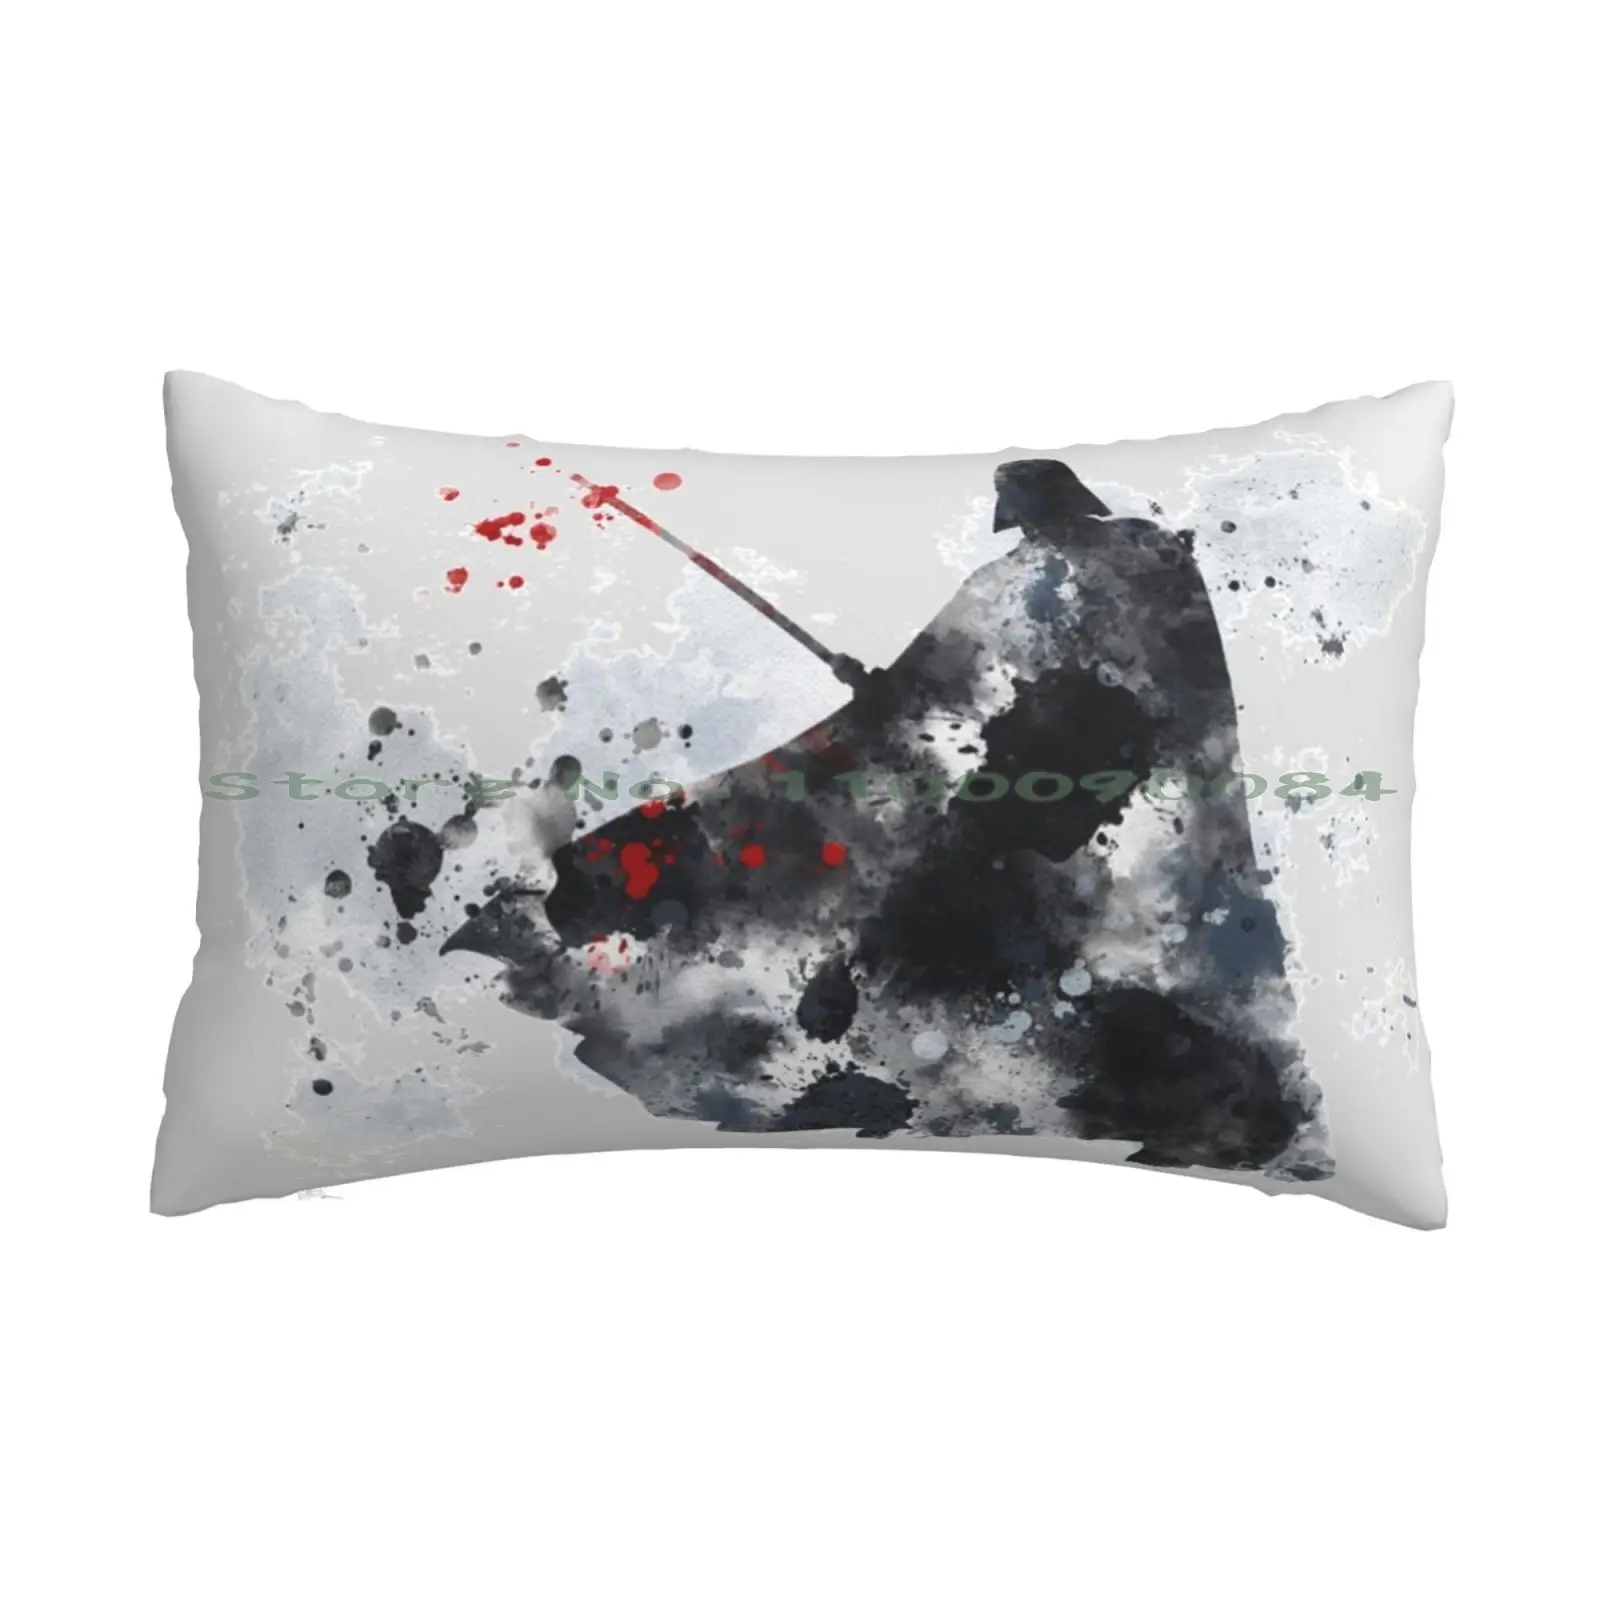 

Space Character With Sword Pillow Case 20x30 50*75 Sofa Bedroom 99 98 97 96 95 94 93 007 1 2 3 4 5 6 7 1 2 3 4 5 The 001 99 98